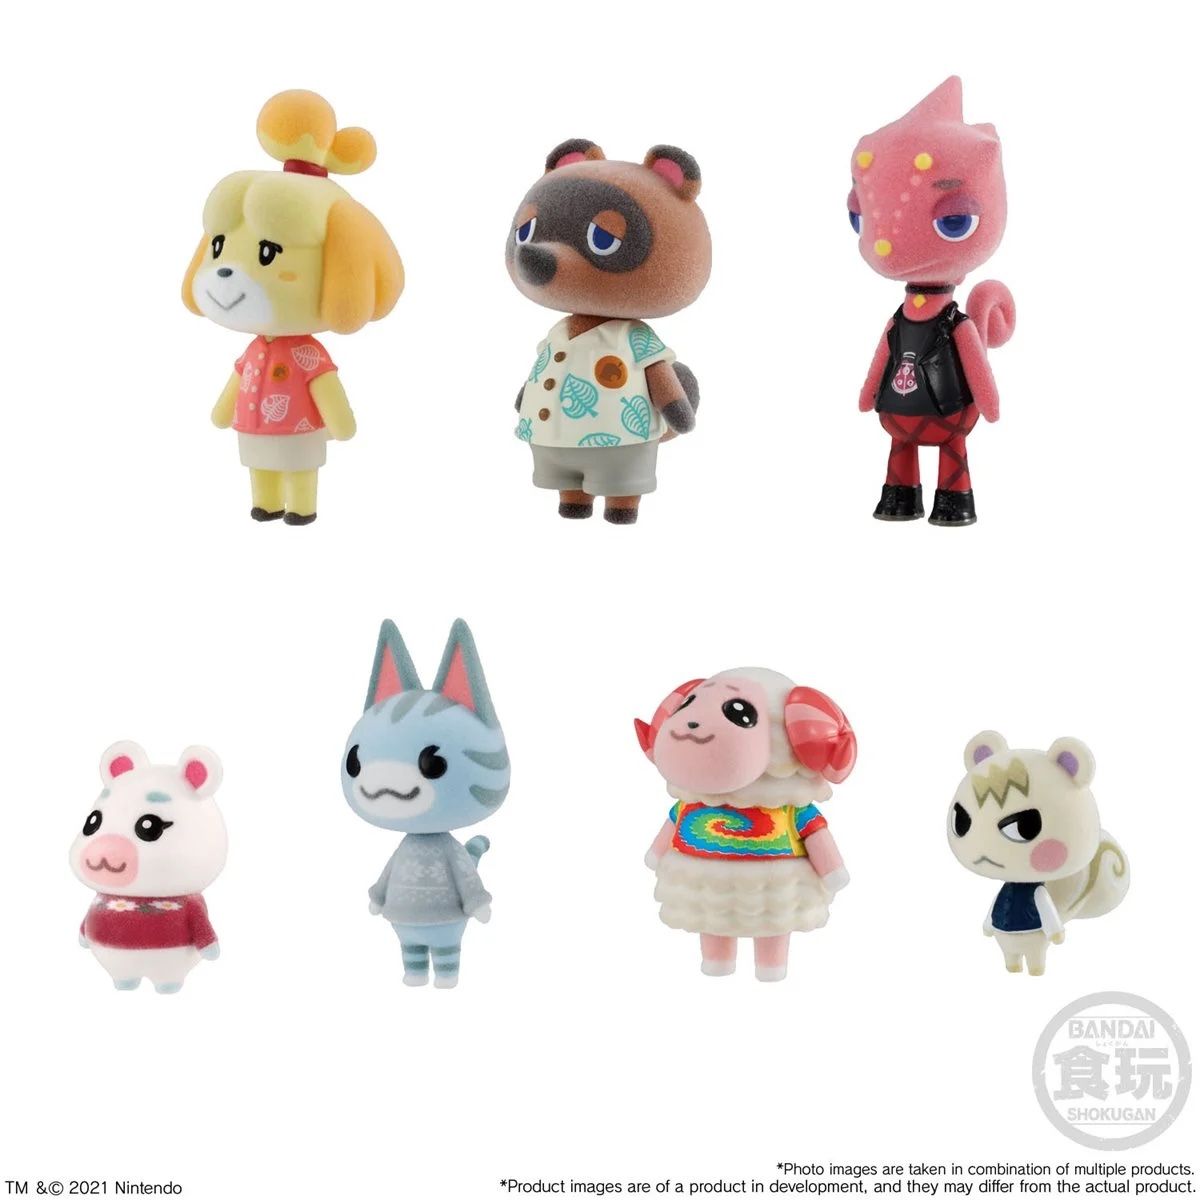 Animal Crossing’s Isabelle, Marshal & More Even Cuter As Official Figurines